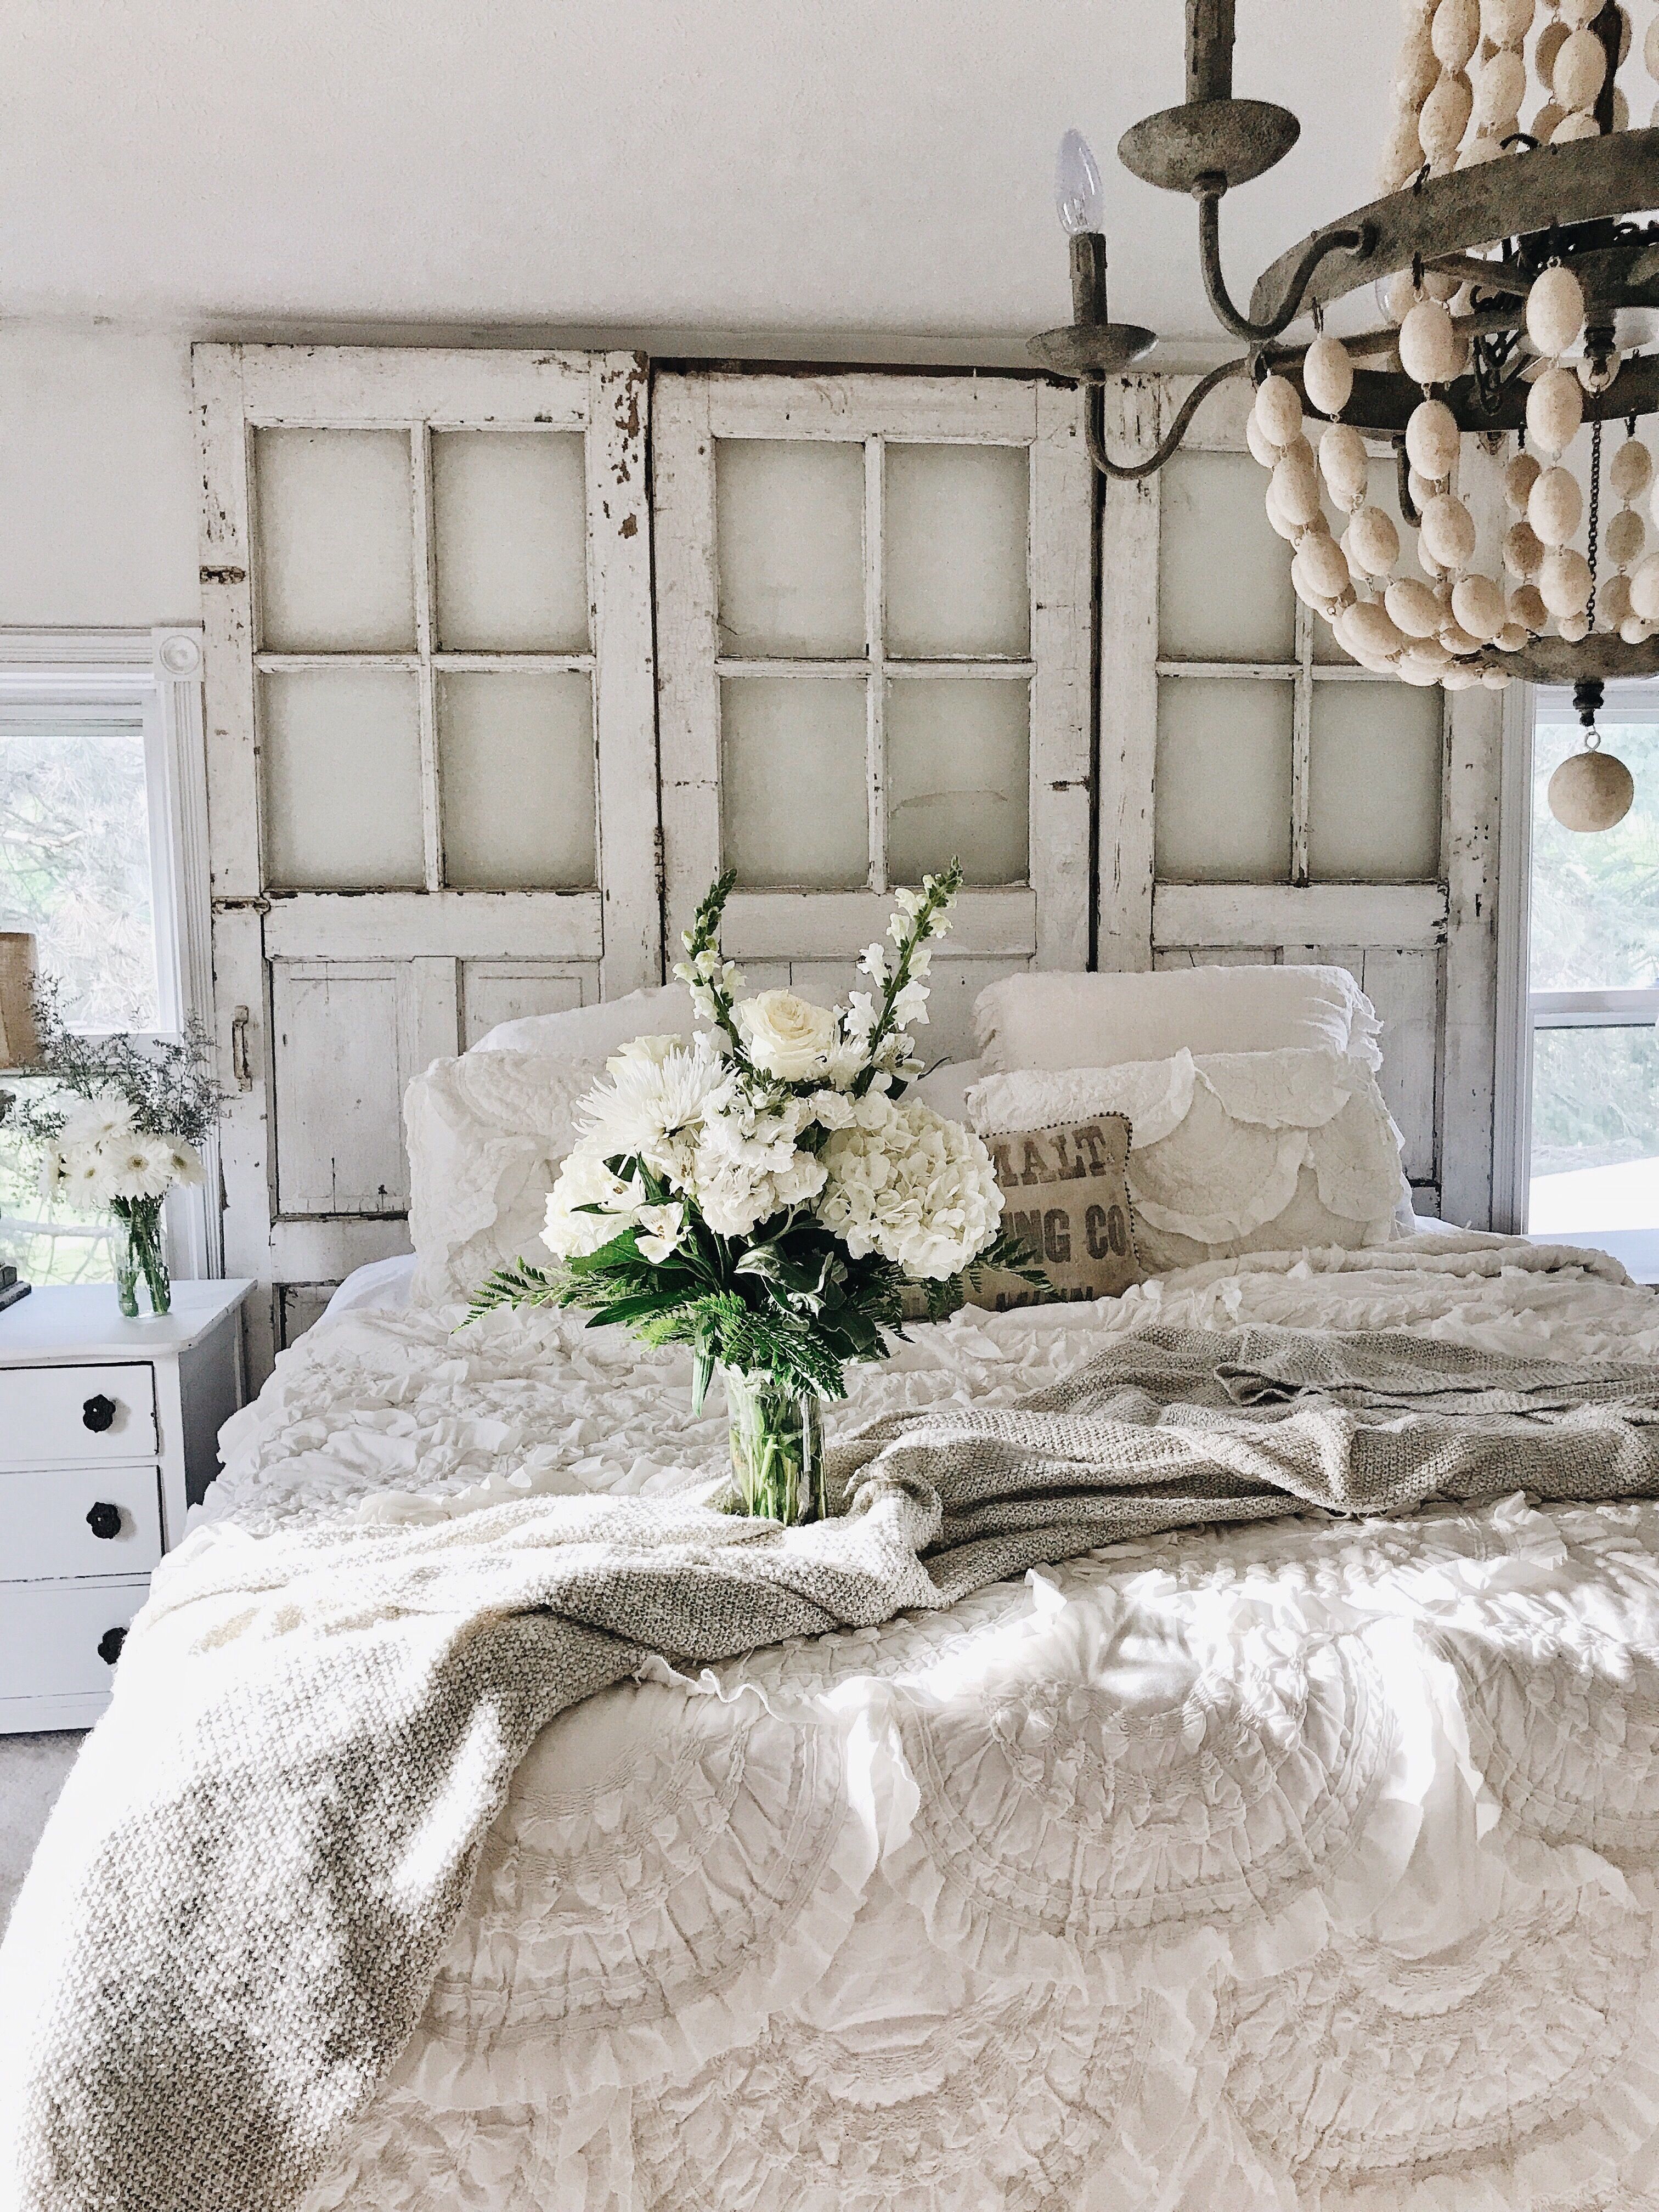 Shabby Chic Furniture And Accessories: How To Create A Cozy Cottage Look